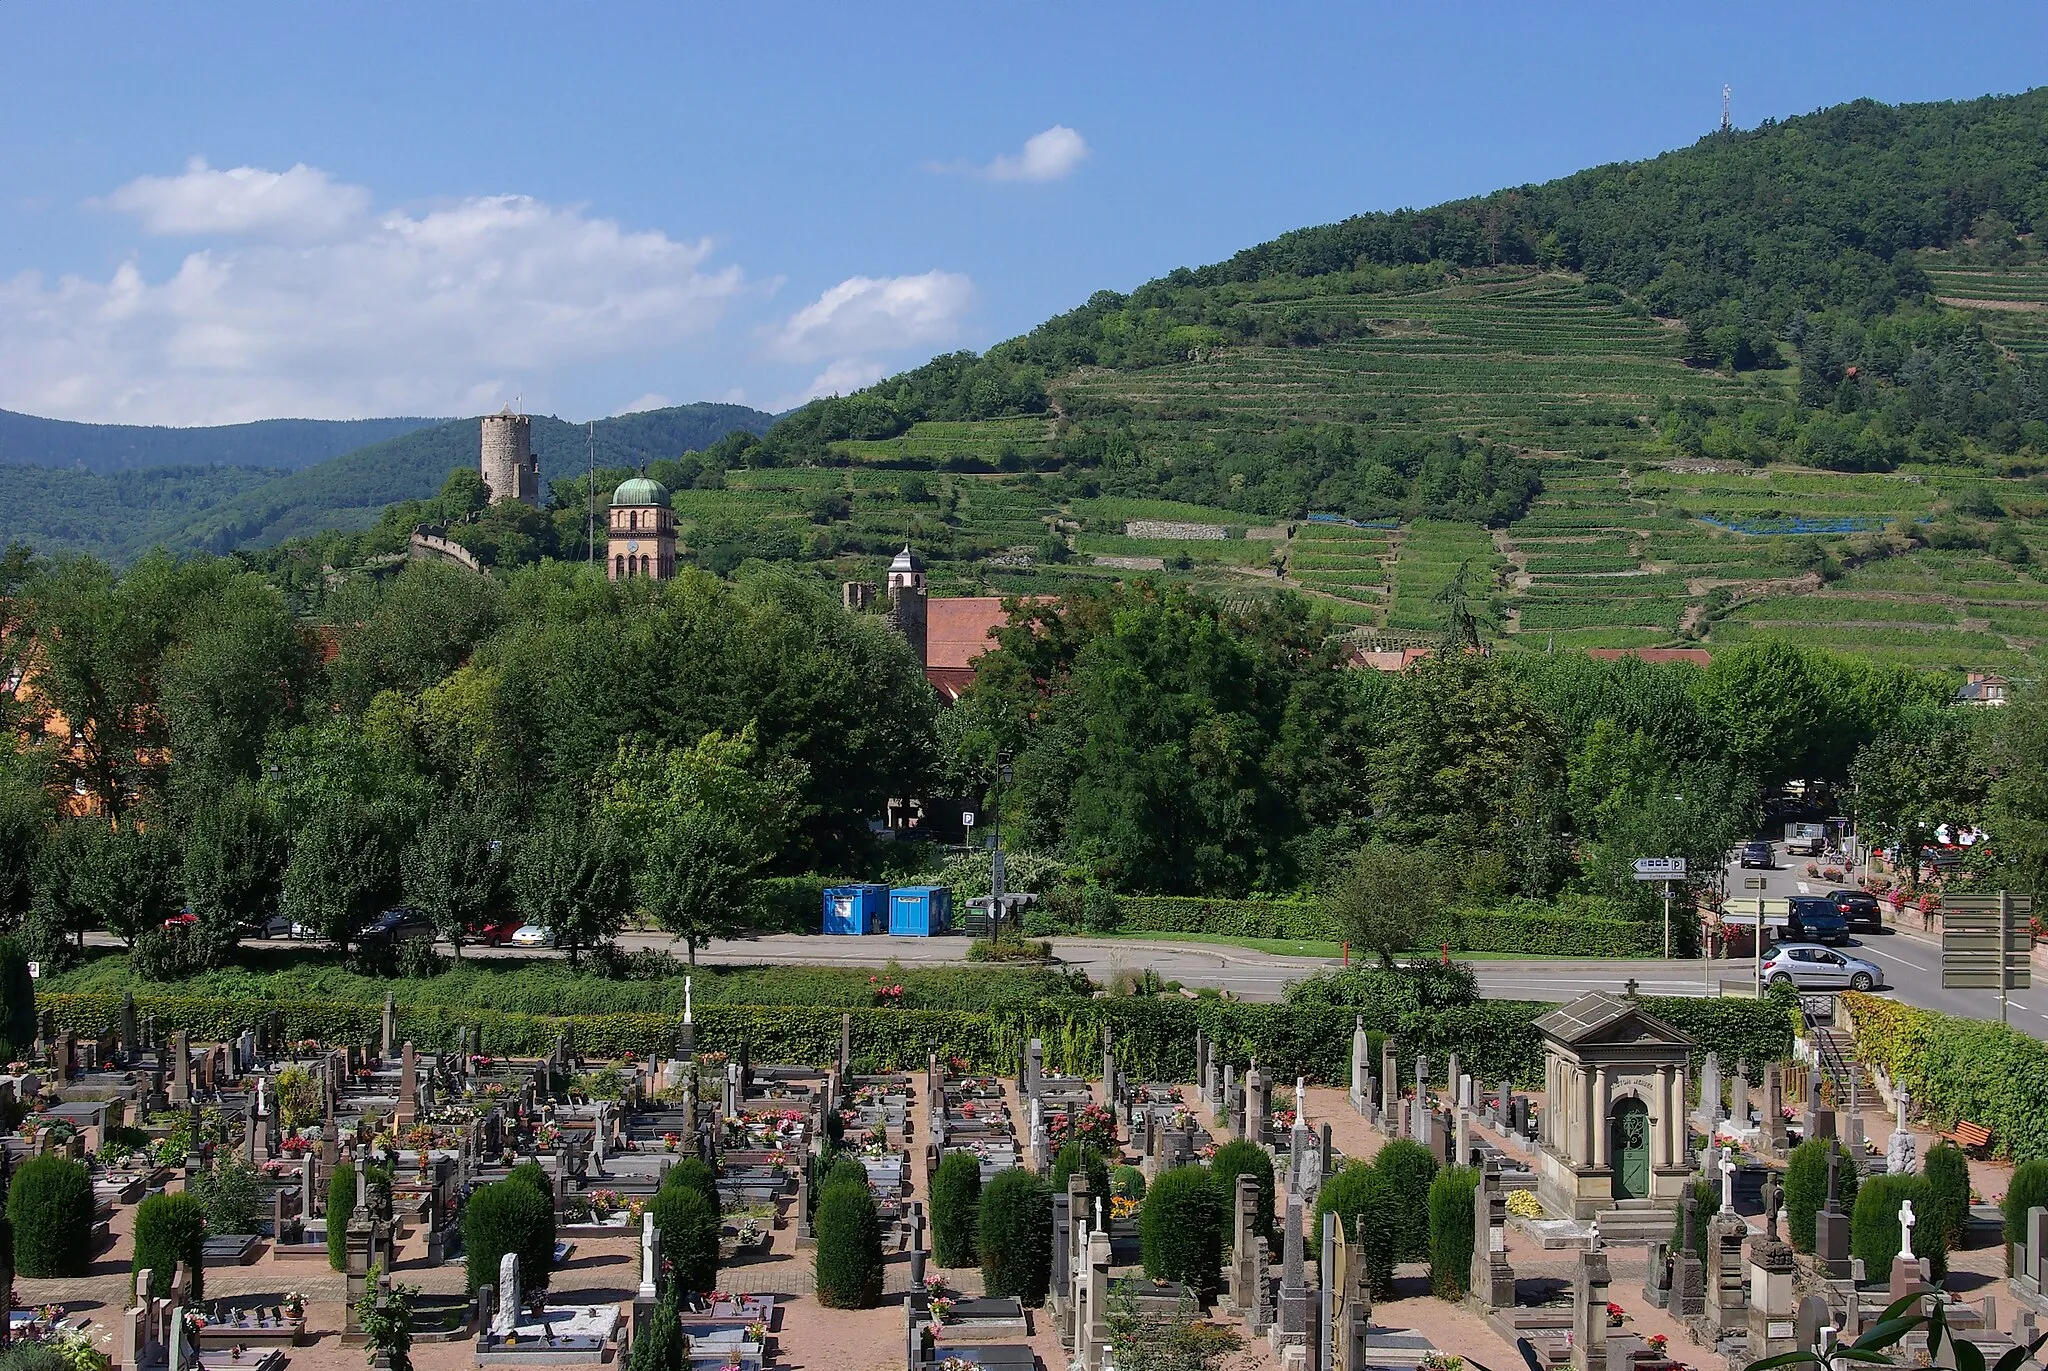 Photo showing: Cemetery and Schlossberg vineyards in Kaysersberg, France.